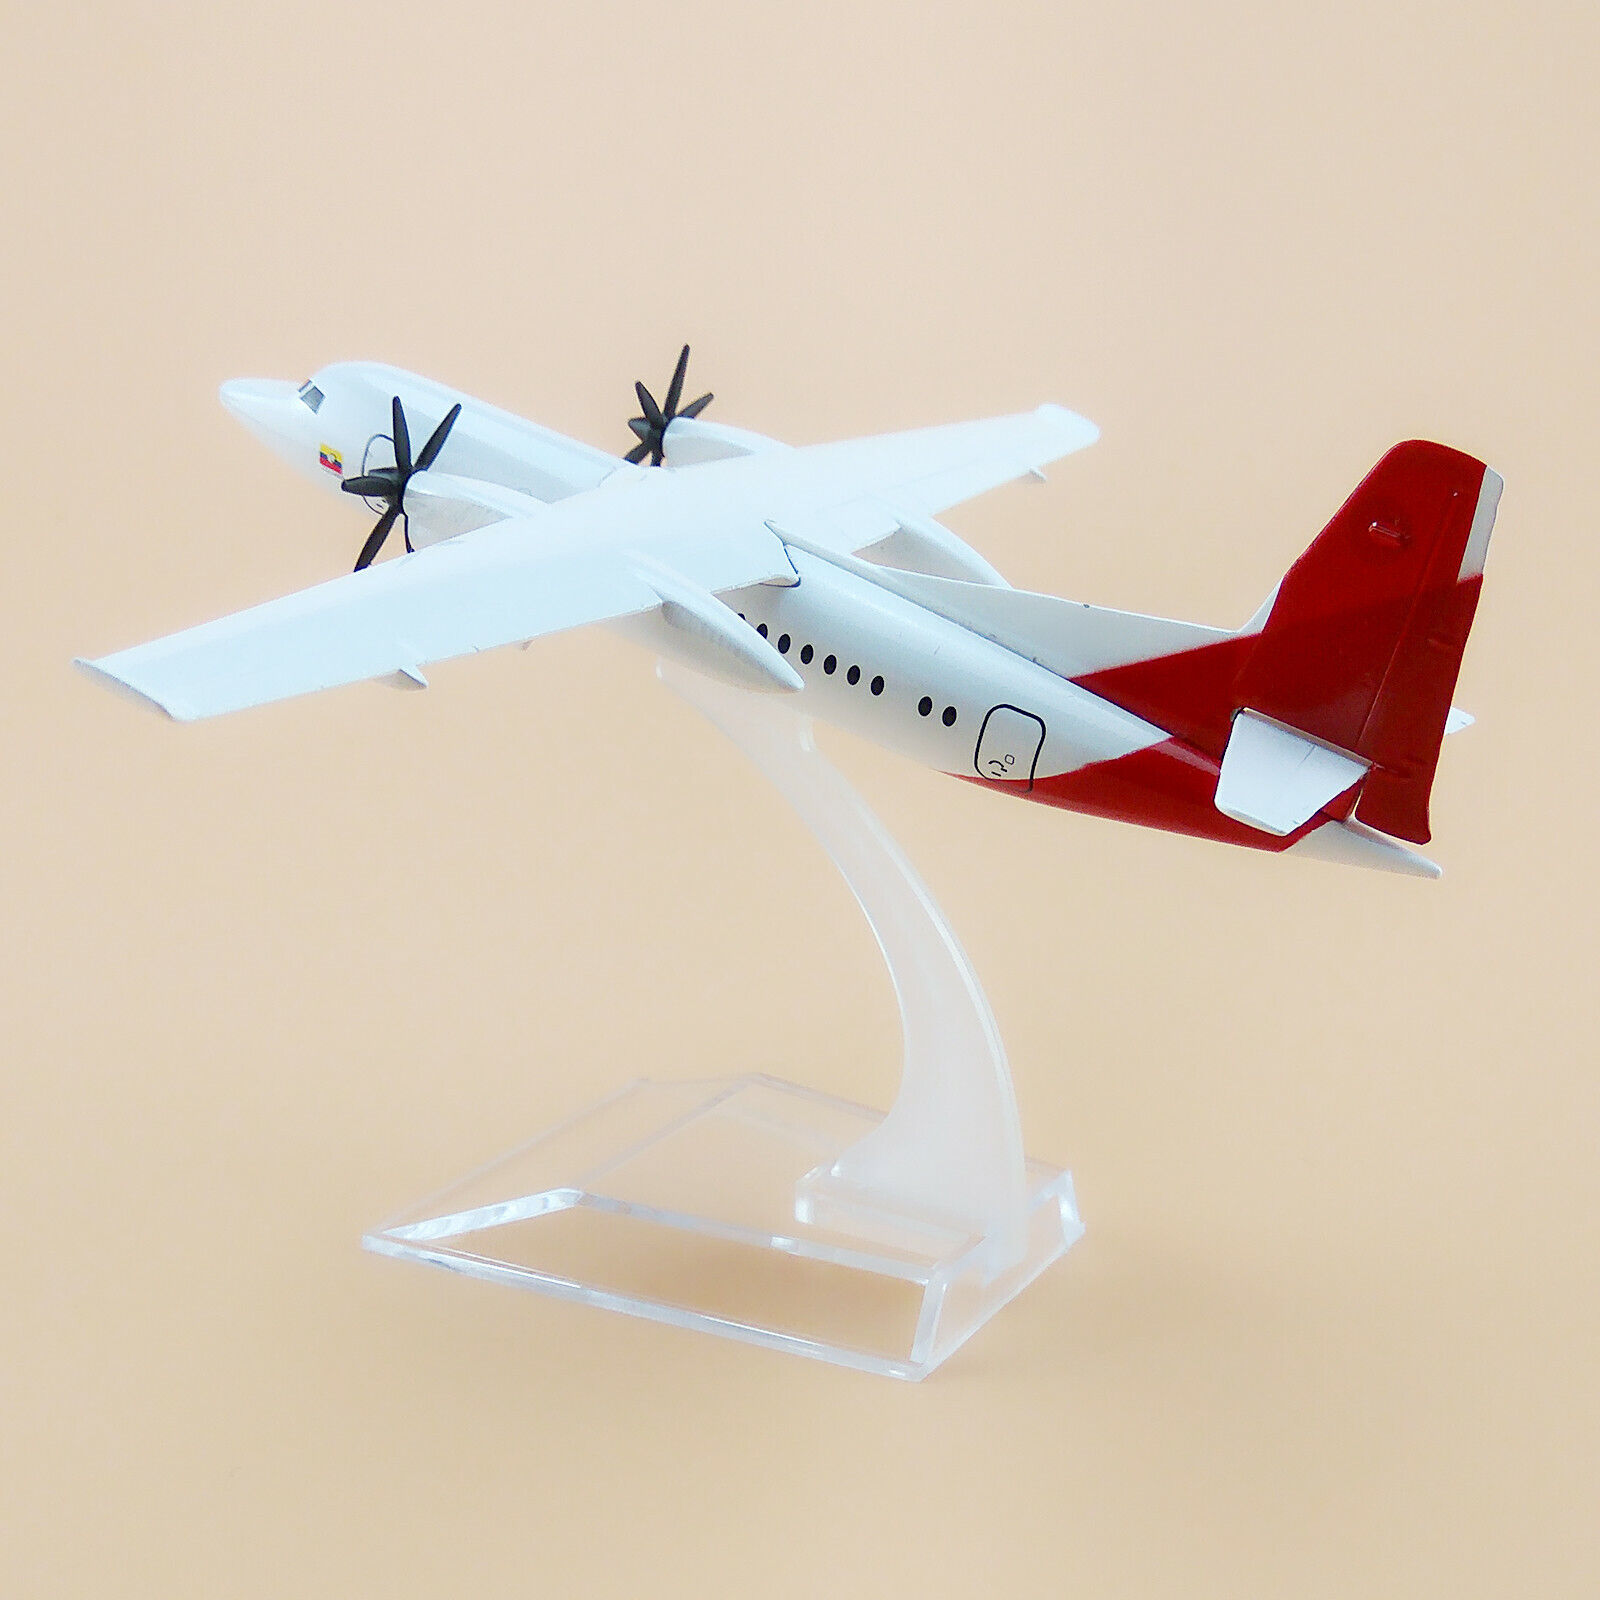 Air Avianca Fokker F50 Airlines Airplane Model Plane Metal Aircraft White 16cm